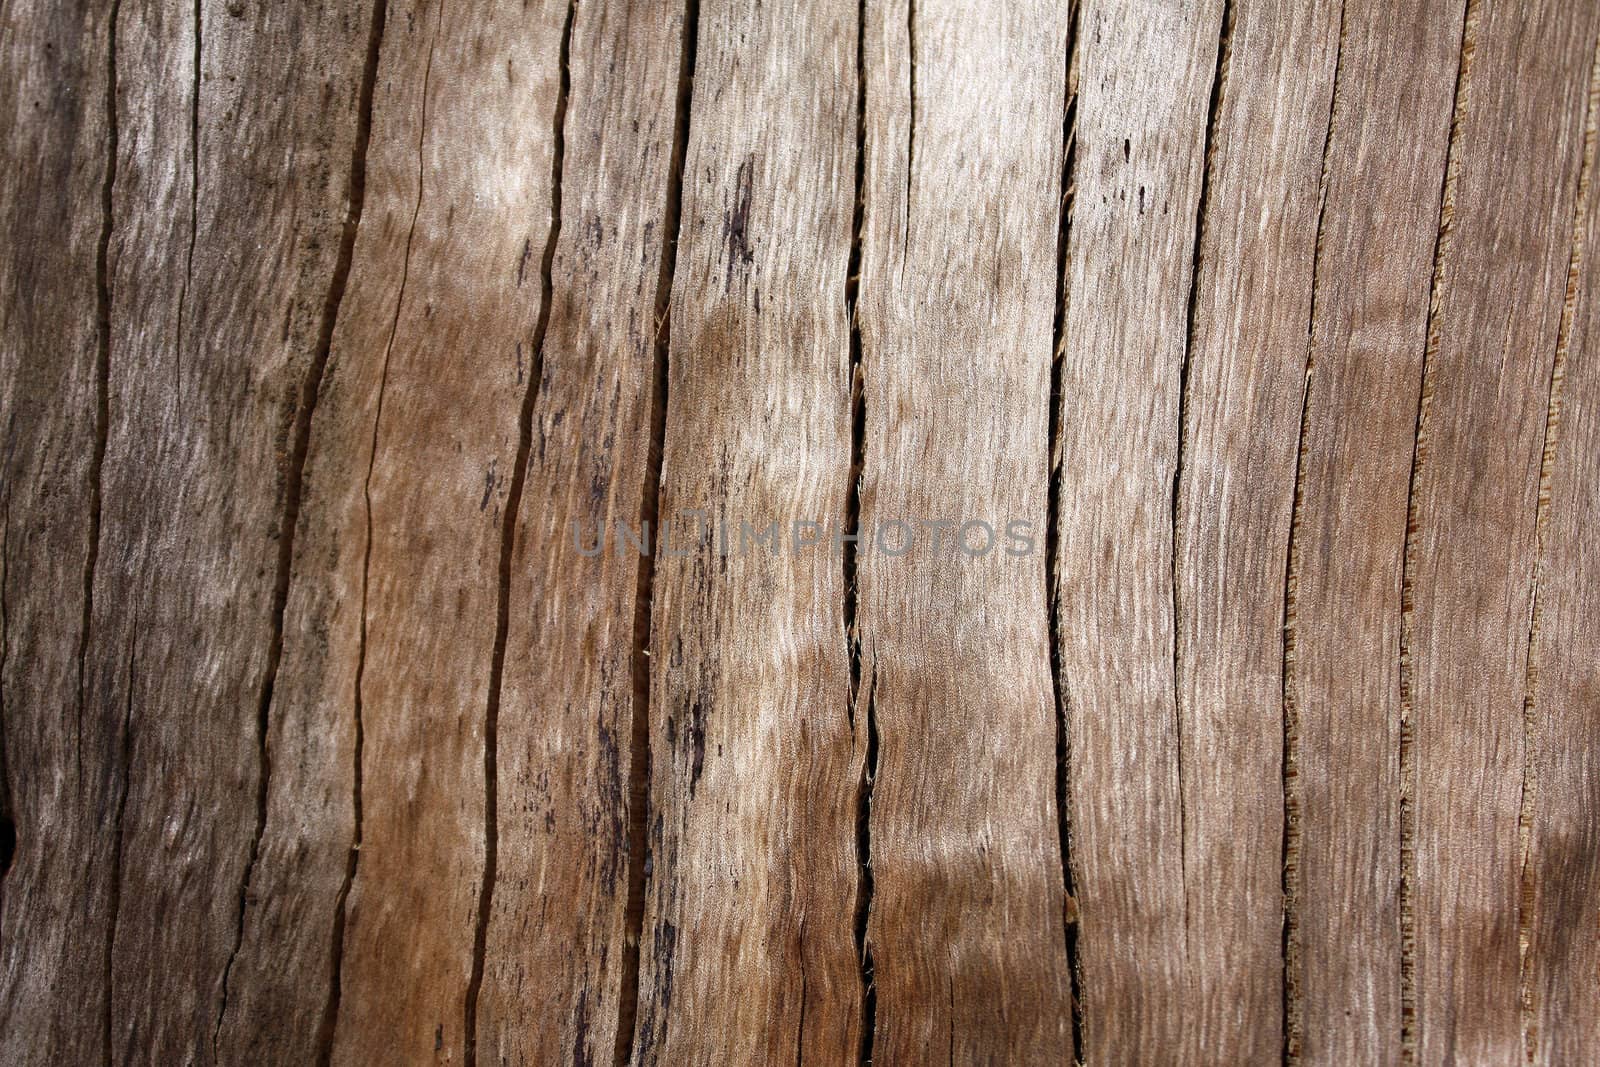 A background of an abstract wooden texture.